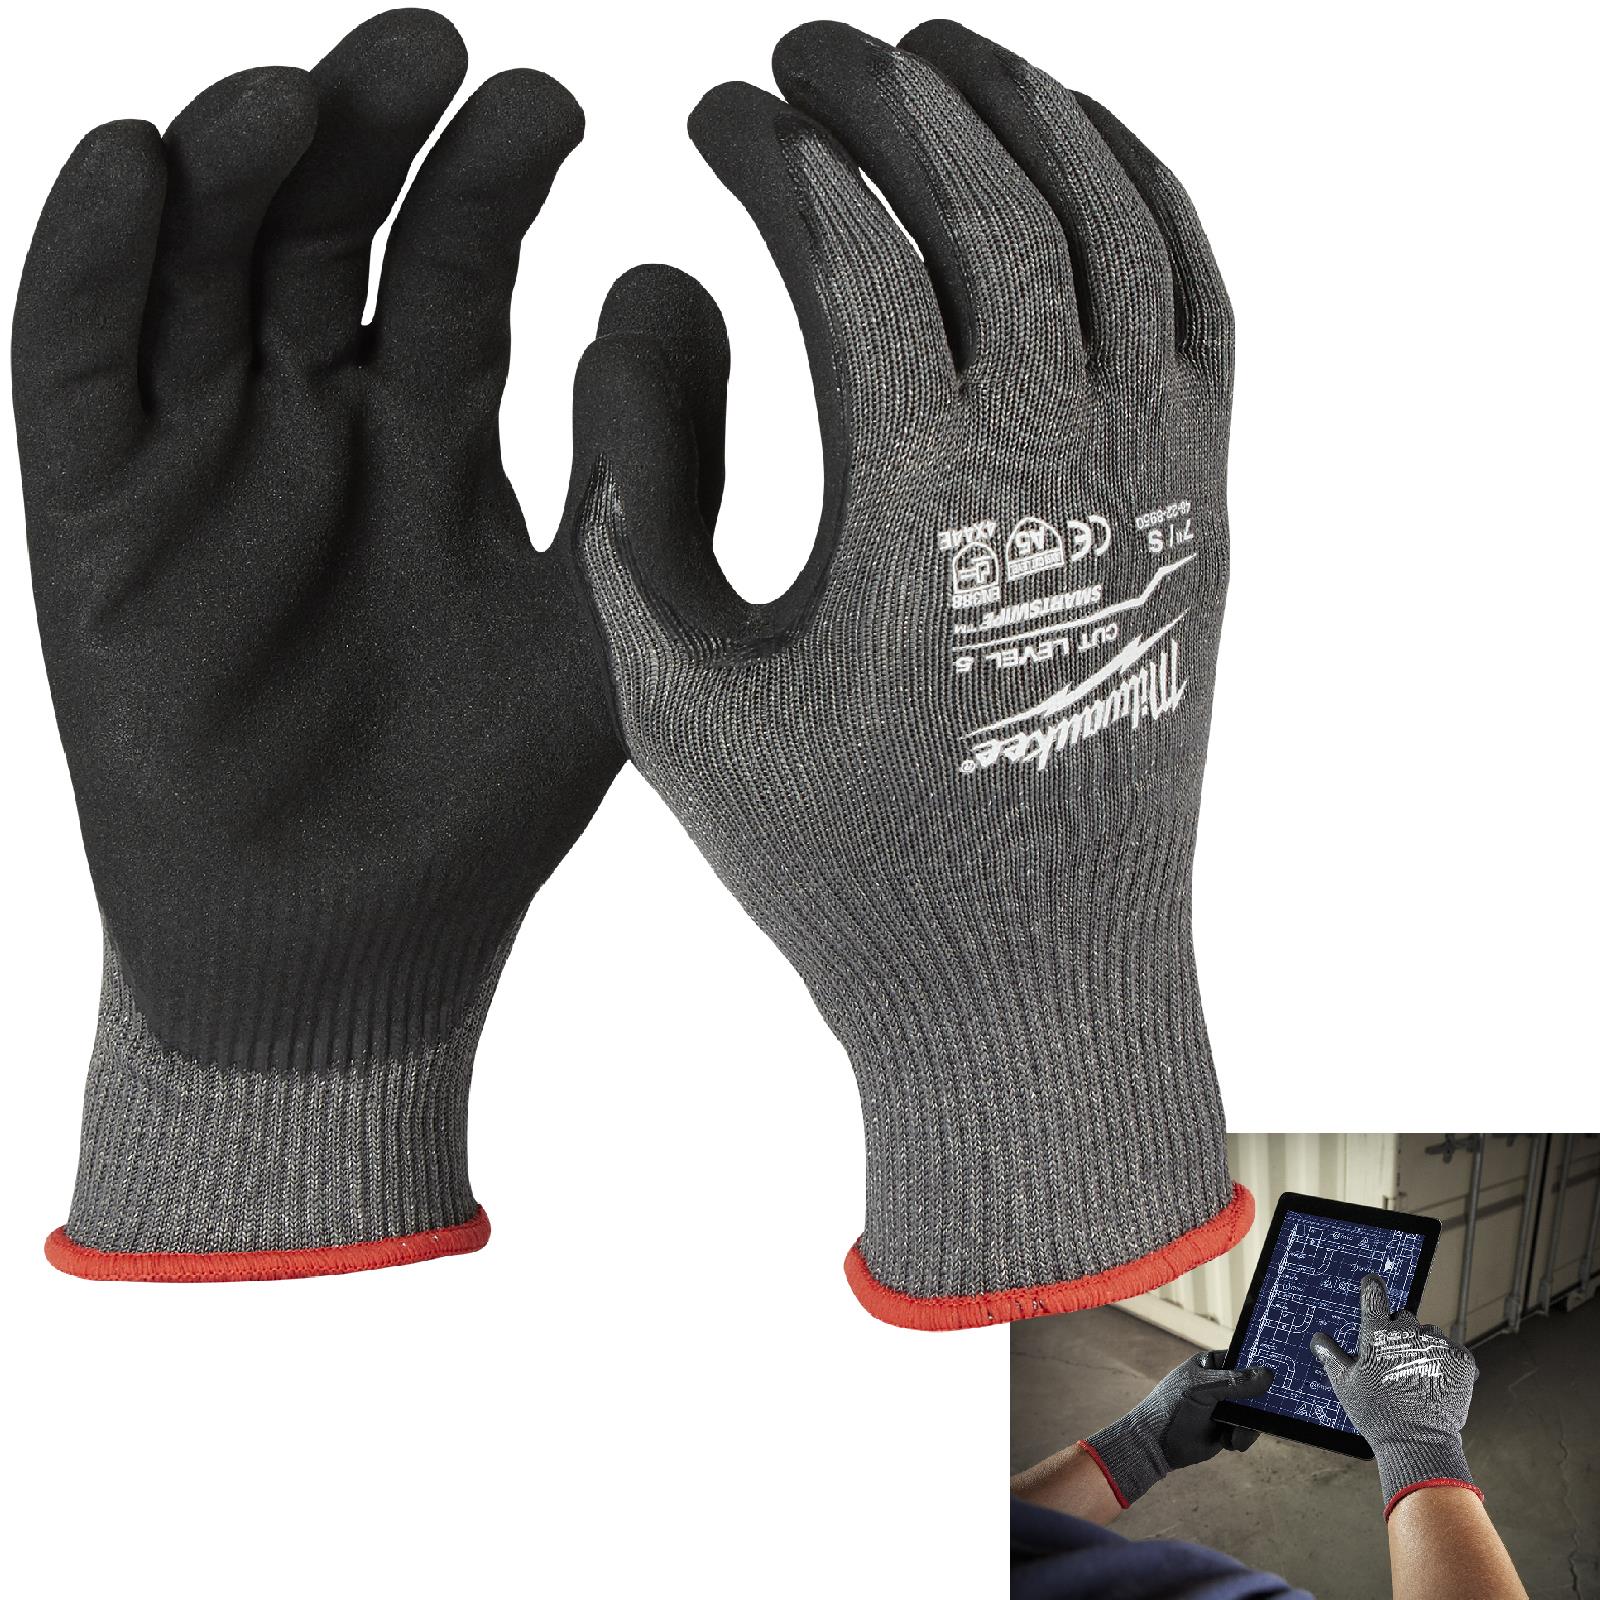 Dipped gloves for heavy application Milwaukee CUT LEVEL 5/E